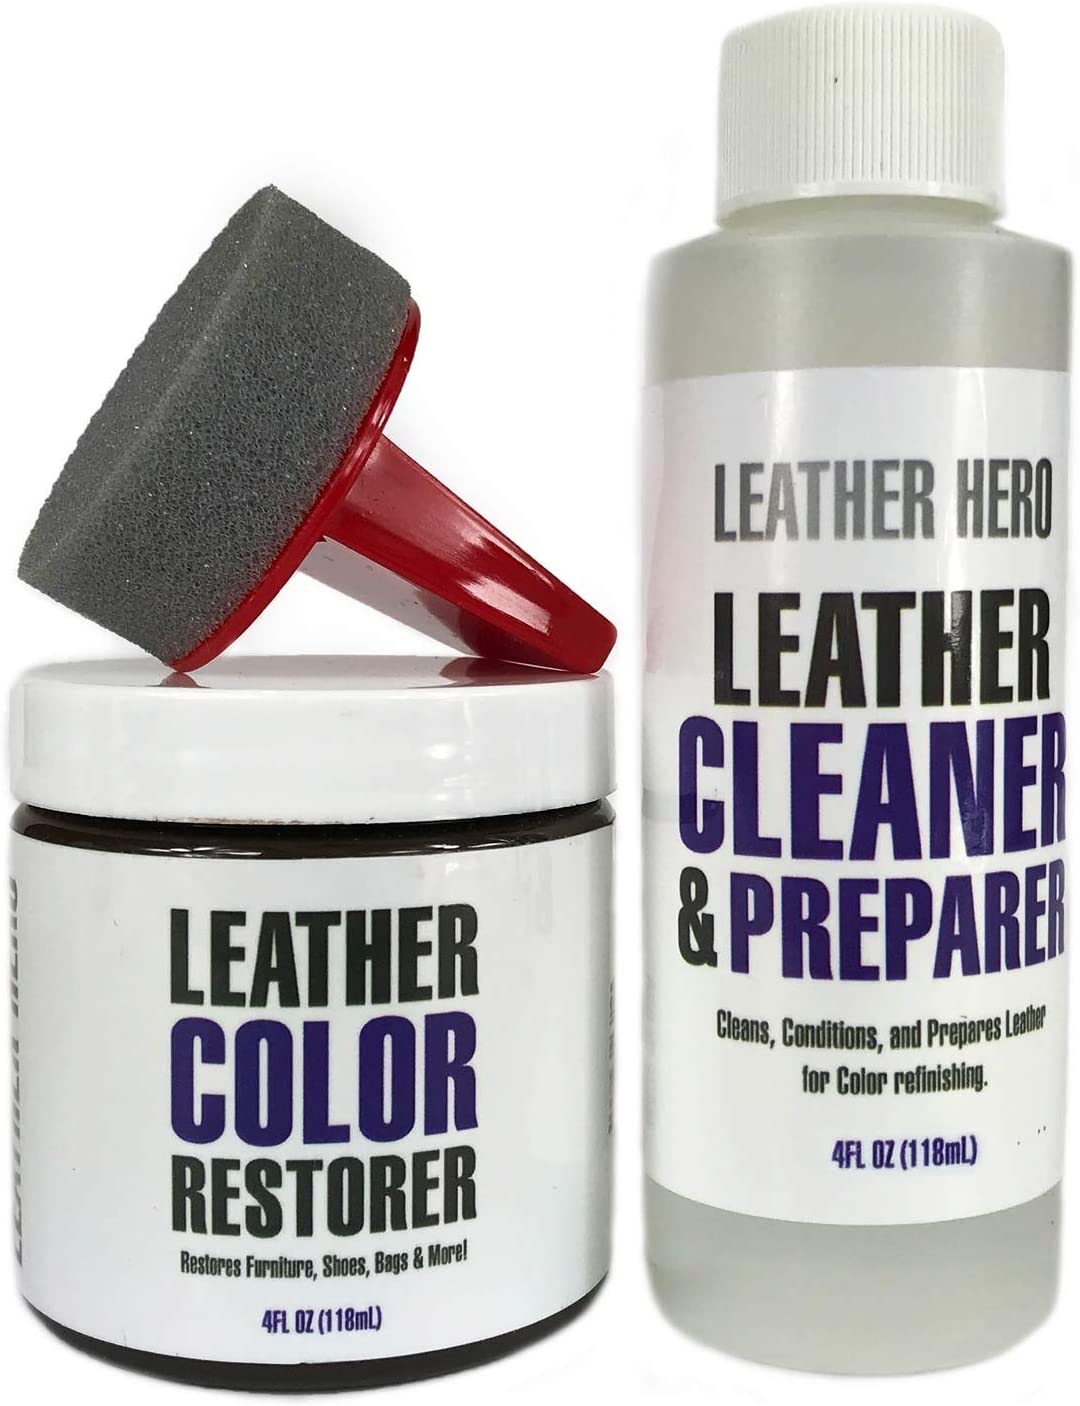 Reed Black Leather And Vinyl Repair Kit - Furniture, Couch, Car Seats,  Sofa, Jacket 